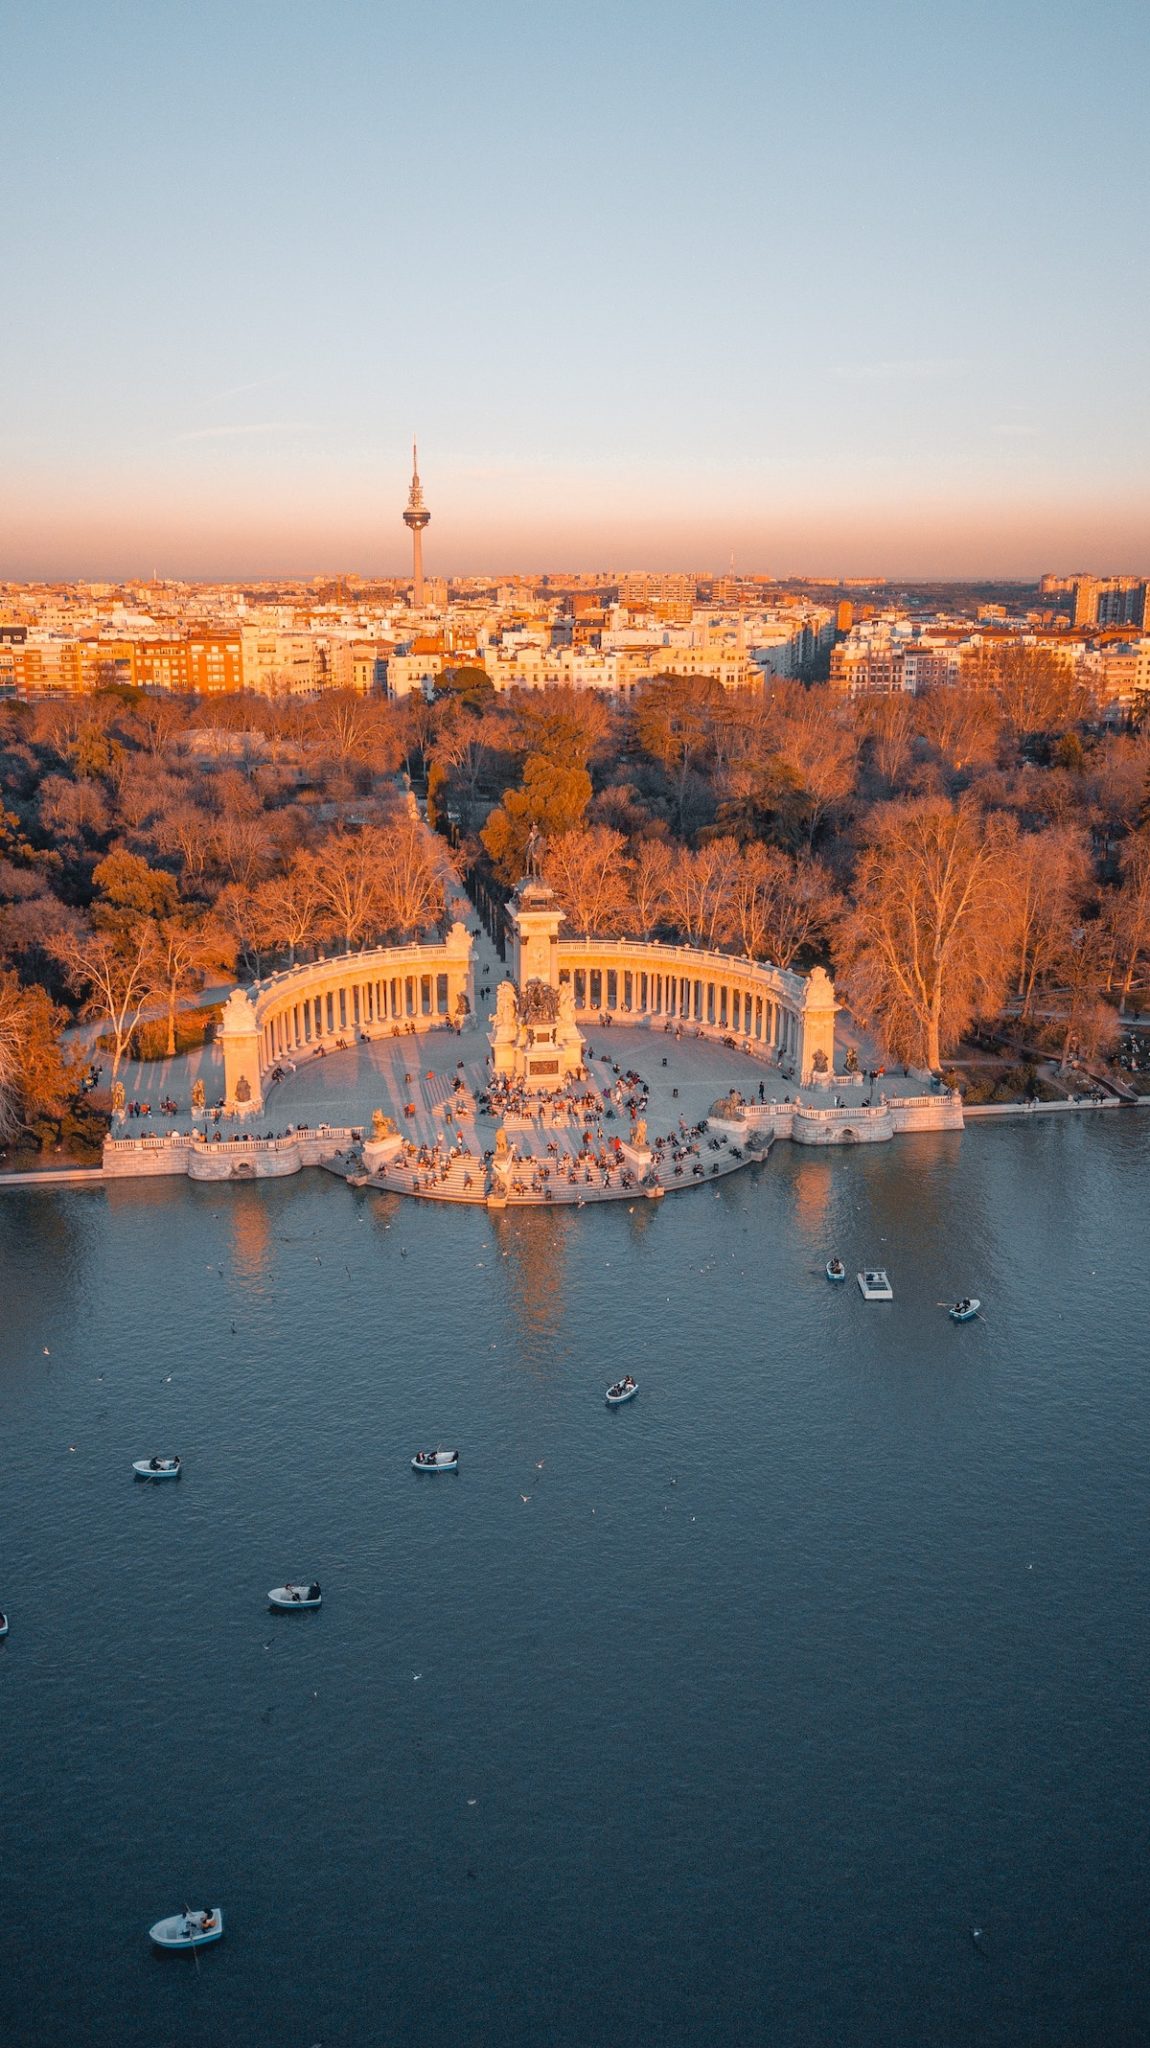 Bird's eye view of the lake in Madrid's Retiro Park, surrounded by a large stone monument and many trees with the city skyline in the background.